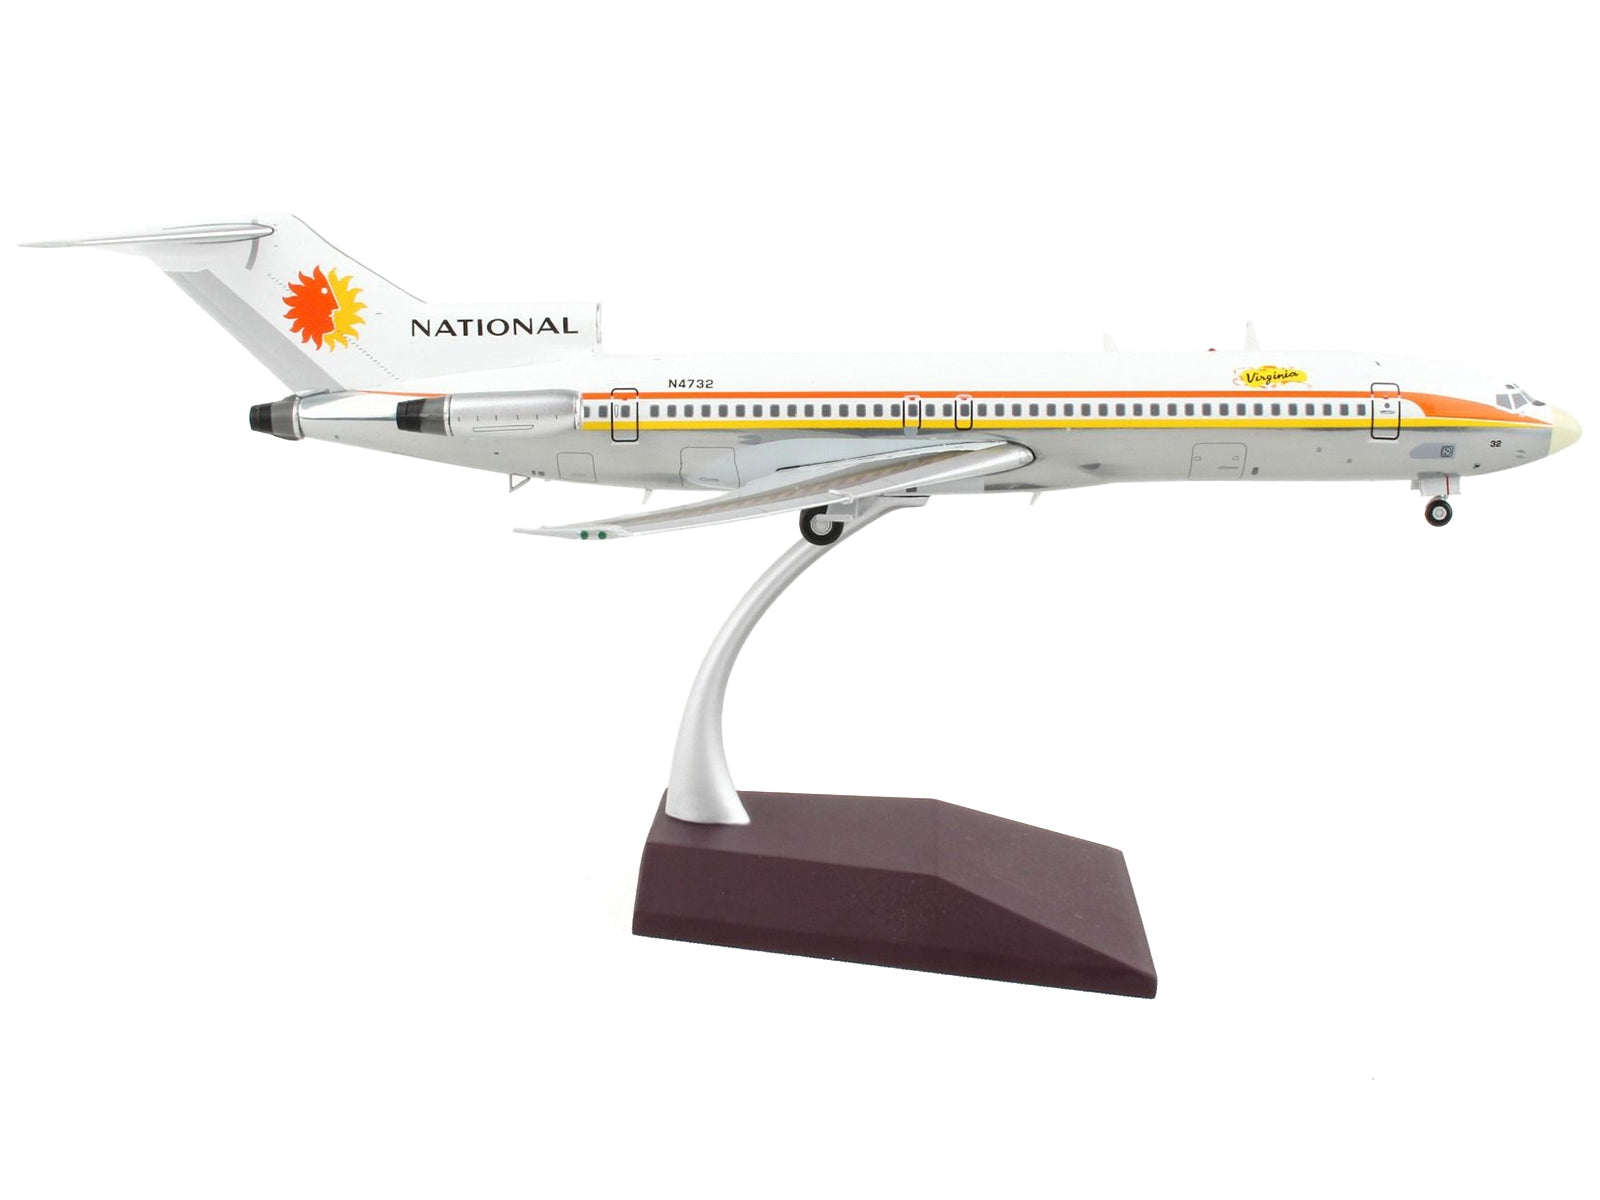 GeminiJets 1/200 Diecast Model: Boeing 727-200 "National Airlines" White, Orange, and Yellow Stripes